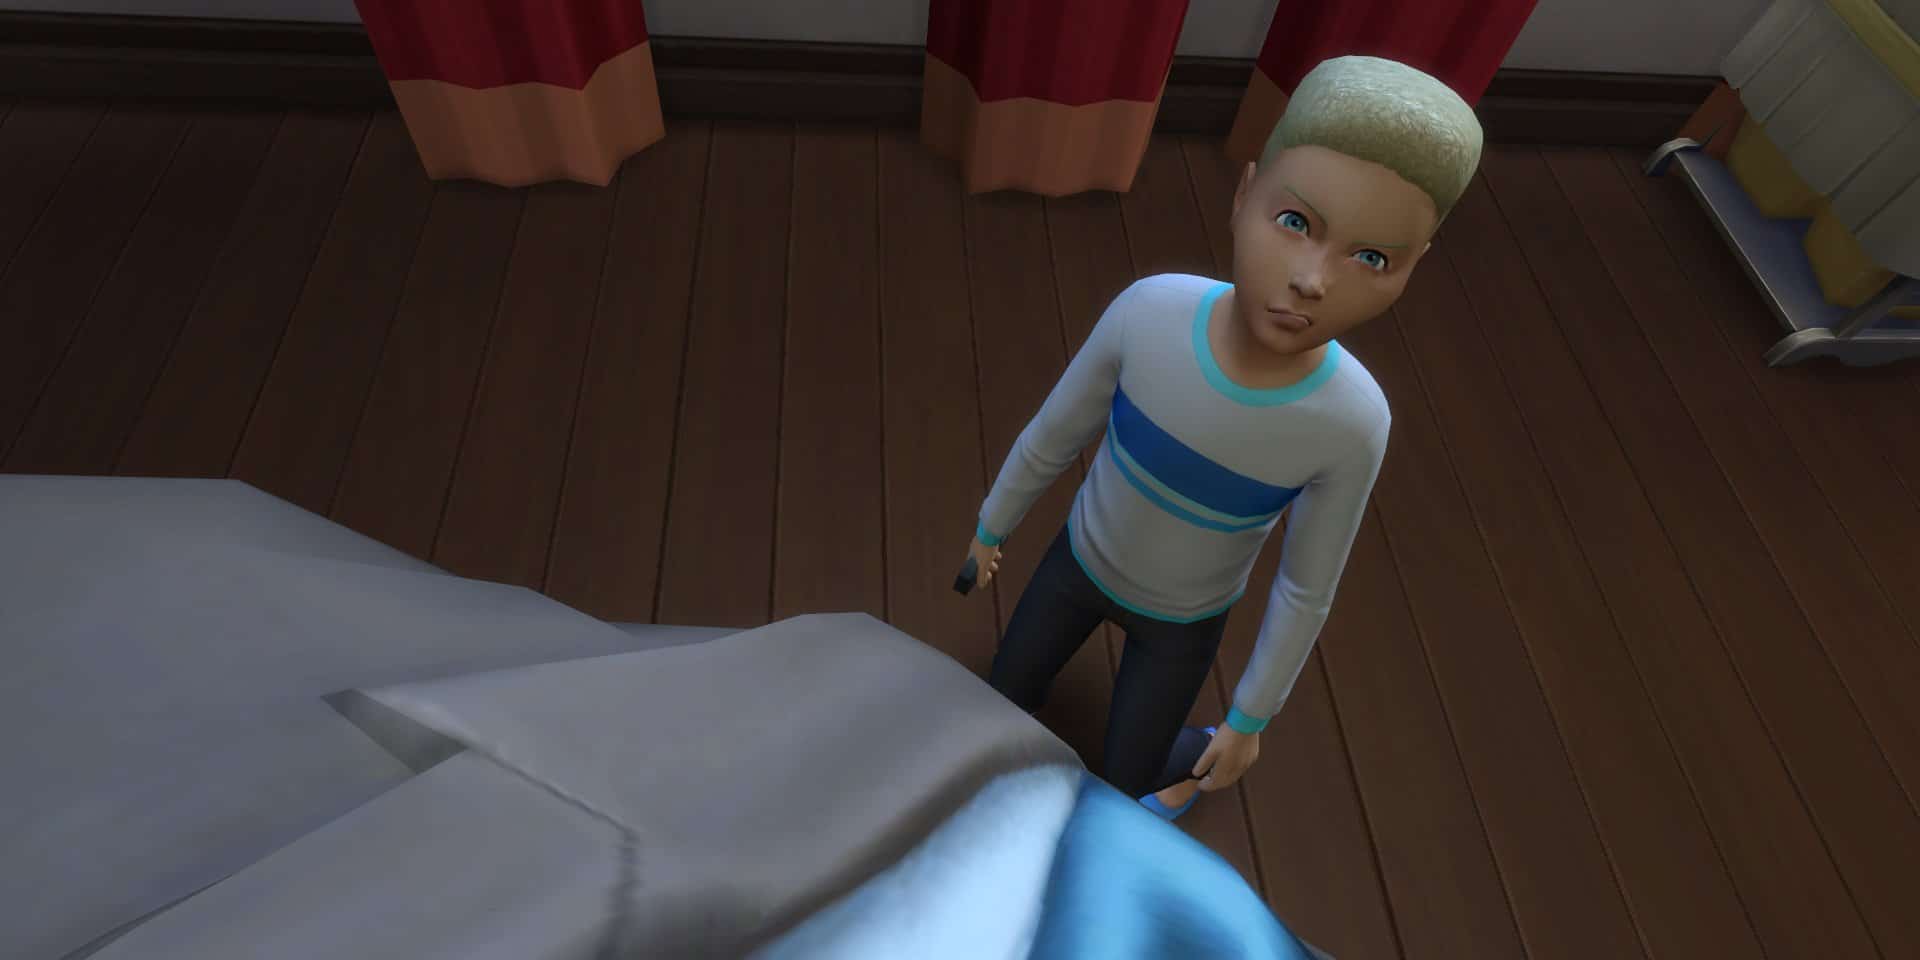 A Sim looks at a child in in a first-person gameplay in The Sims 4.